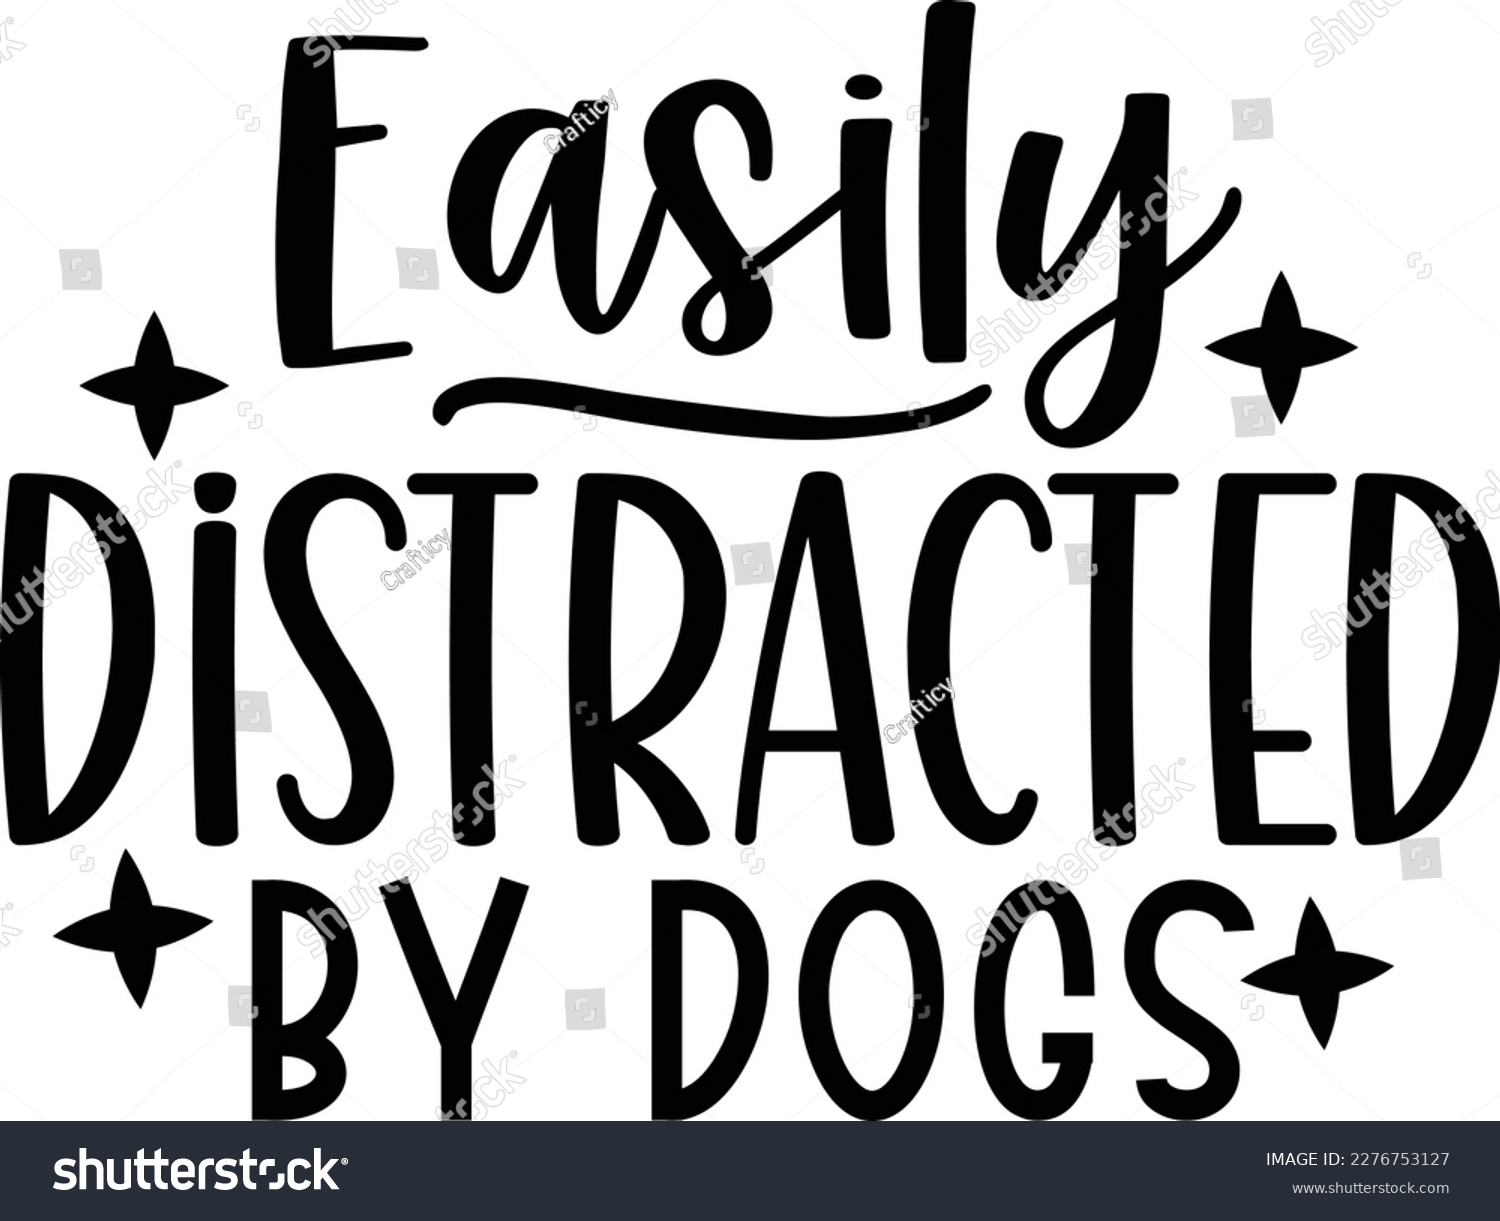 SVG of Easily distracted by dogs dog life svg best typography tshirt design premium vector svg